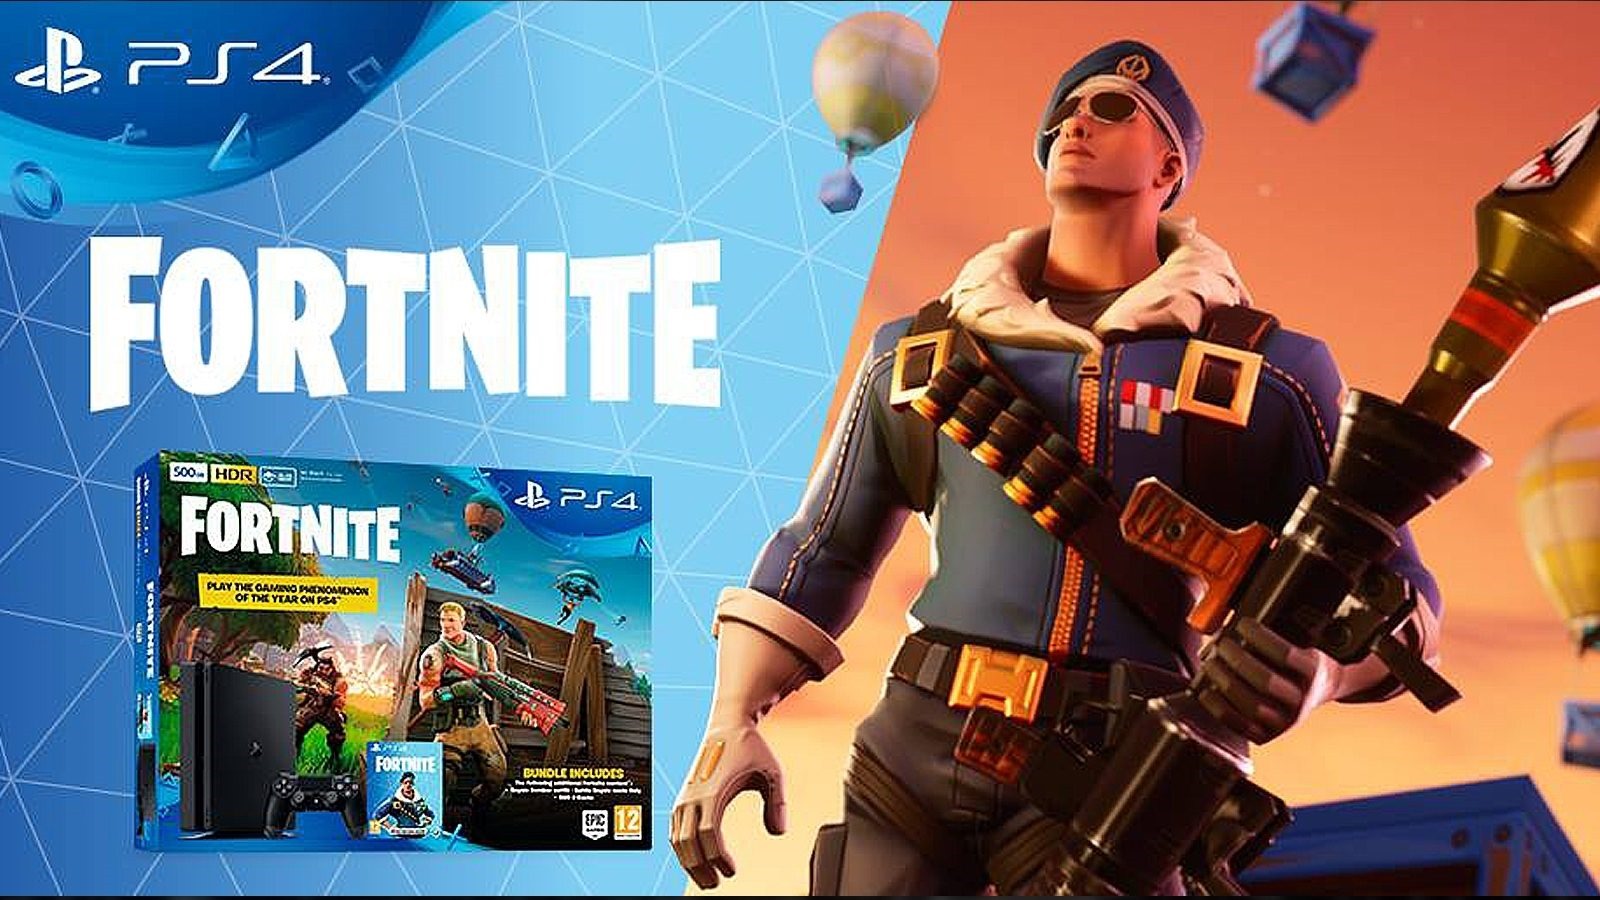 A Special Fortnite Playstation 4 Bundle With Exclusive Skin Gets Leaked Siliconera